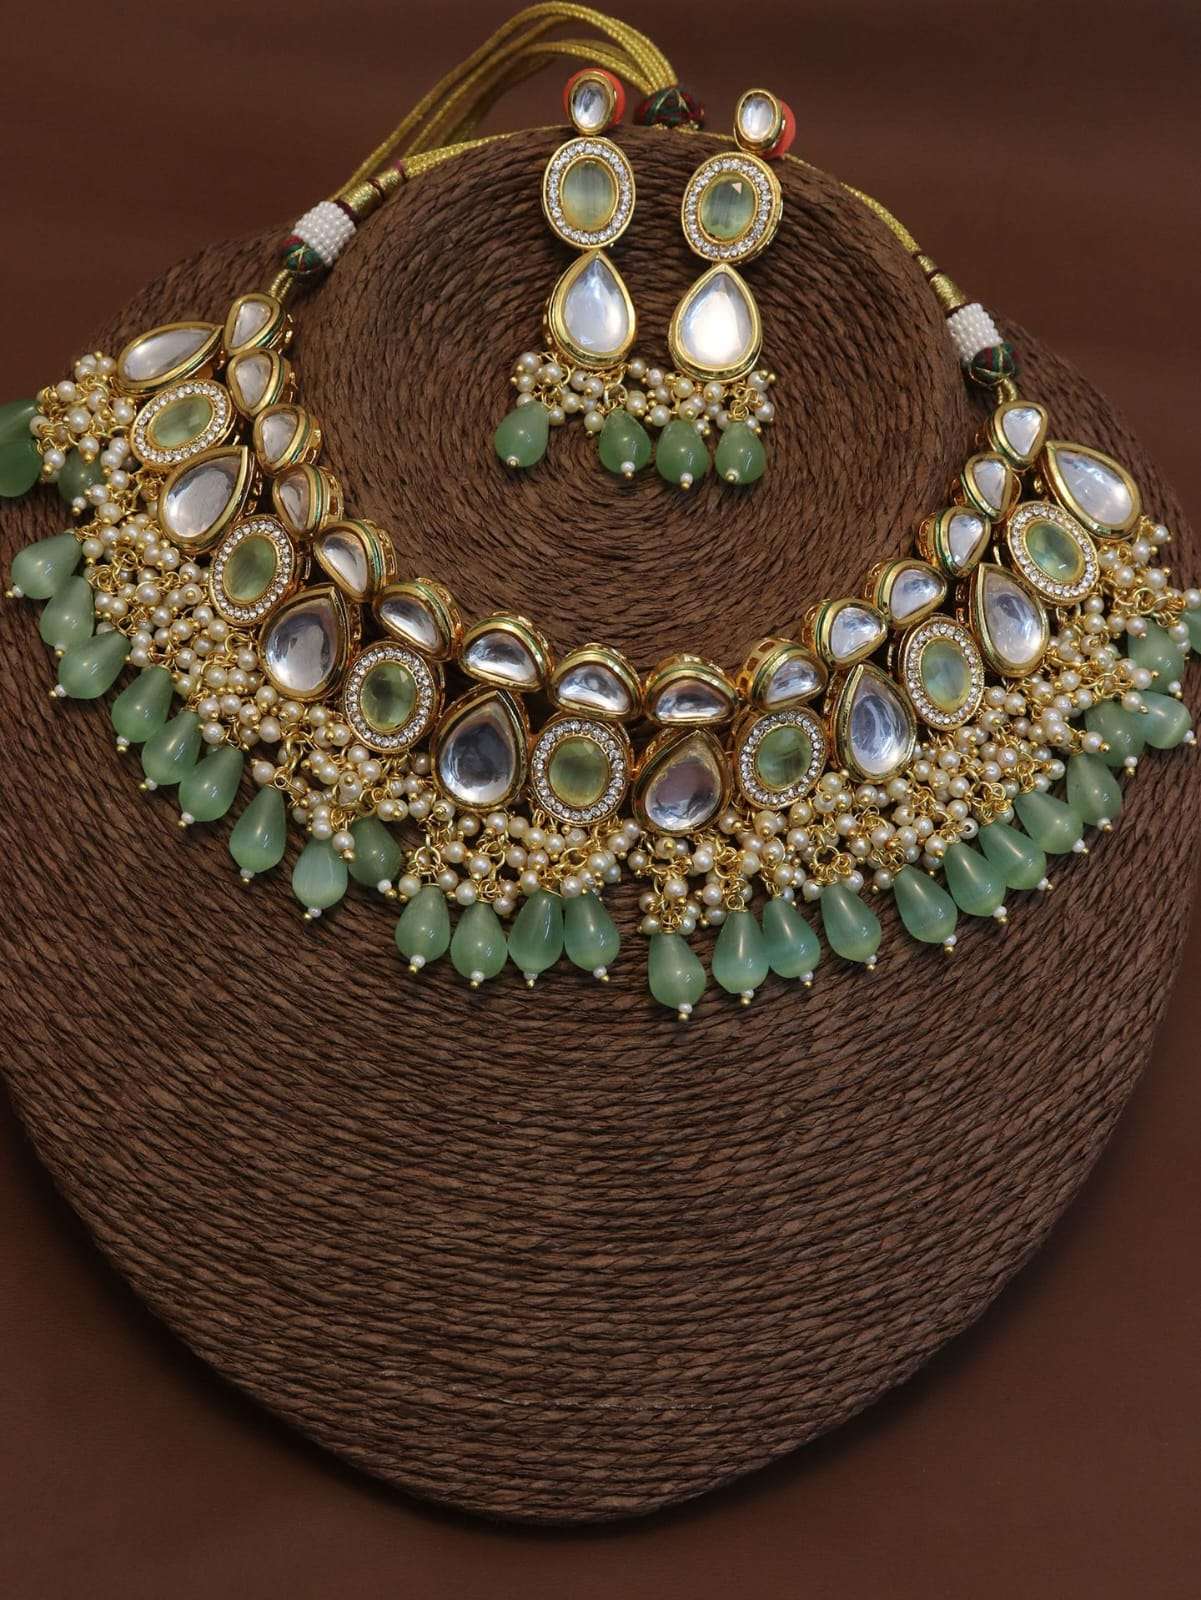 S-703 BY FASHID WHOLESALE 01 TO 05 SERIES TRADITIONAL ARTIFICIAL JEWELLERY FOR INDIAN ATTIRE AT EXCLUSIVE RANGE.